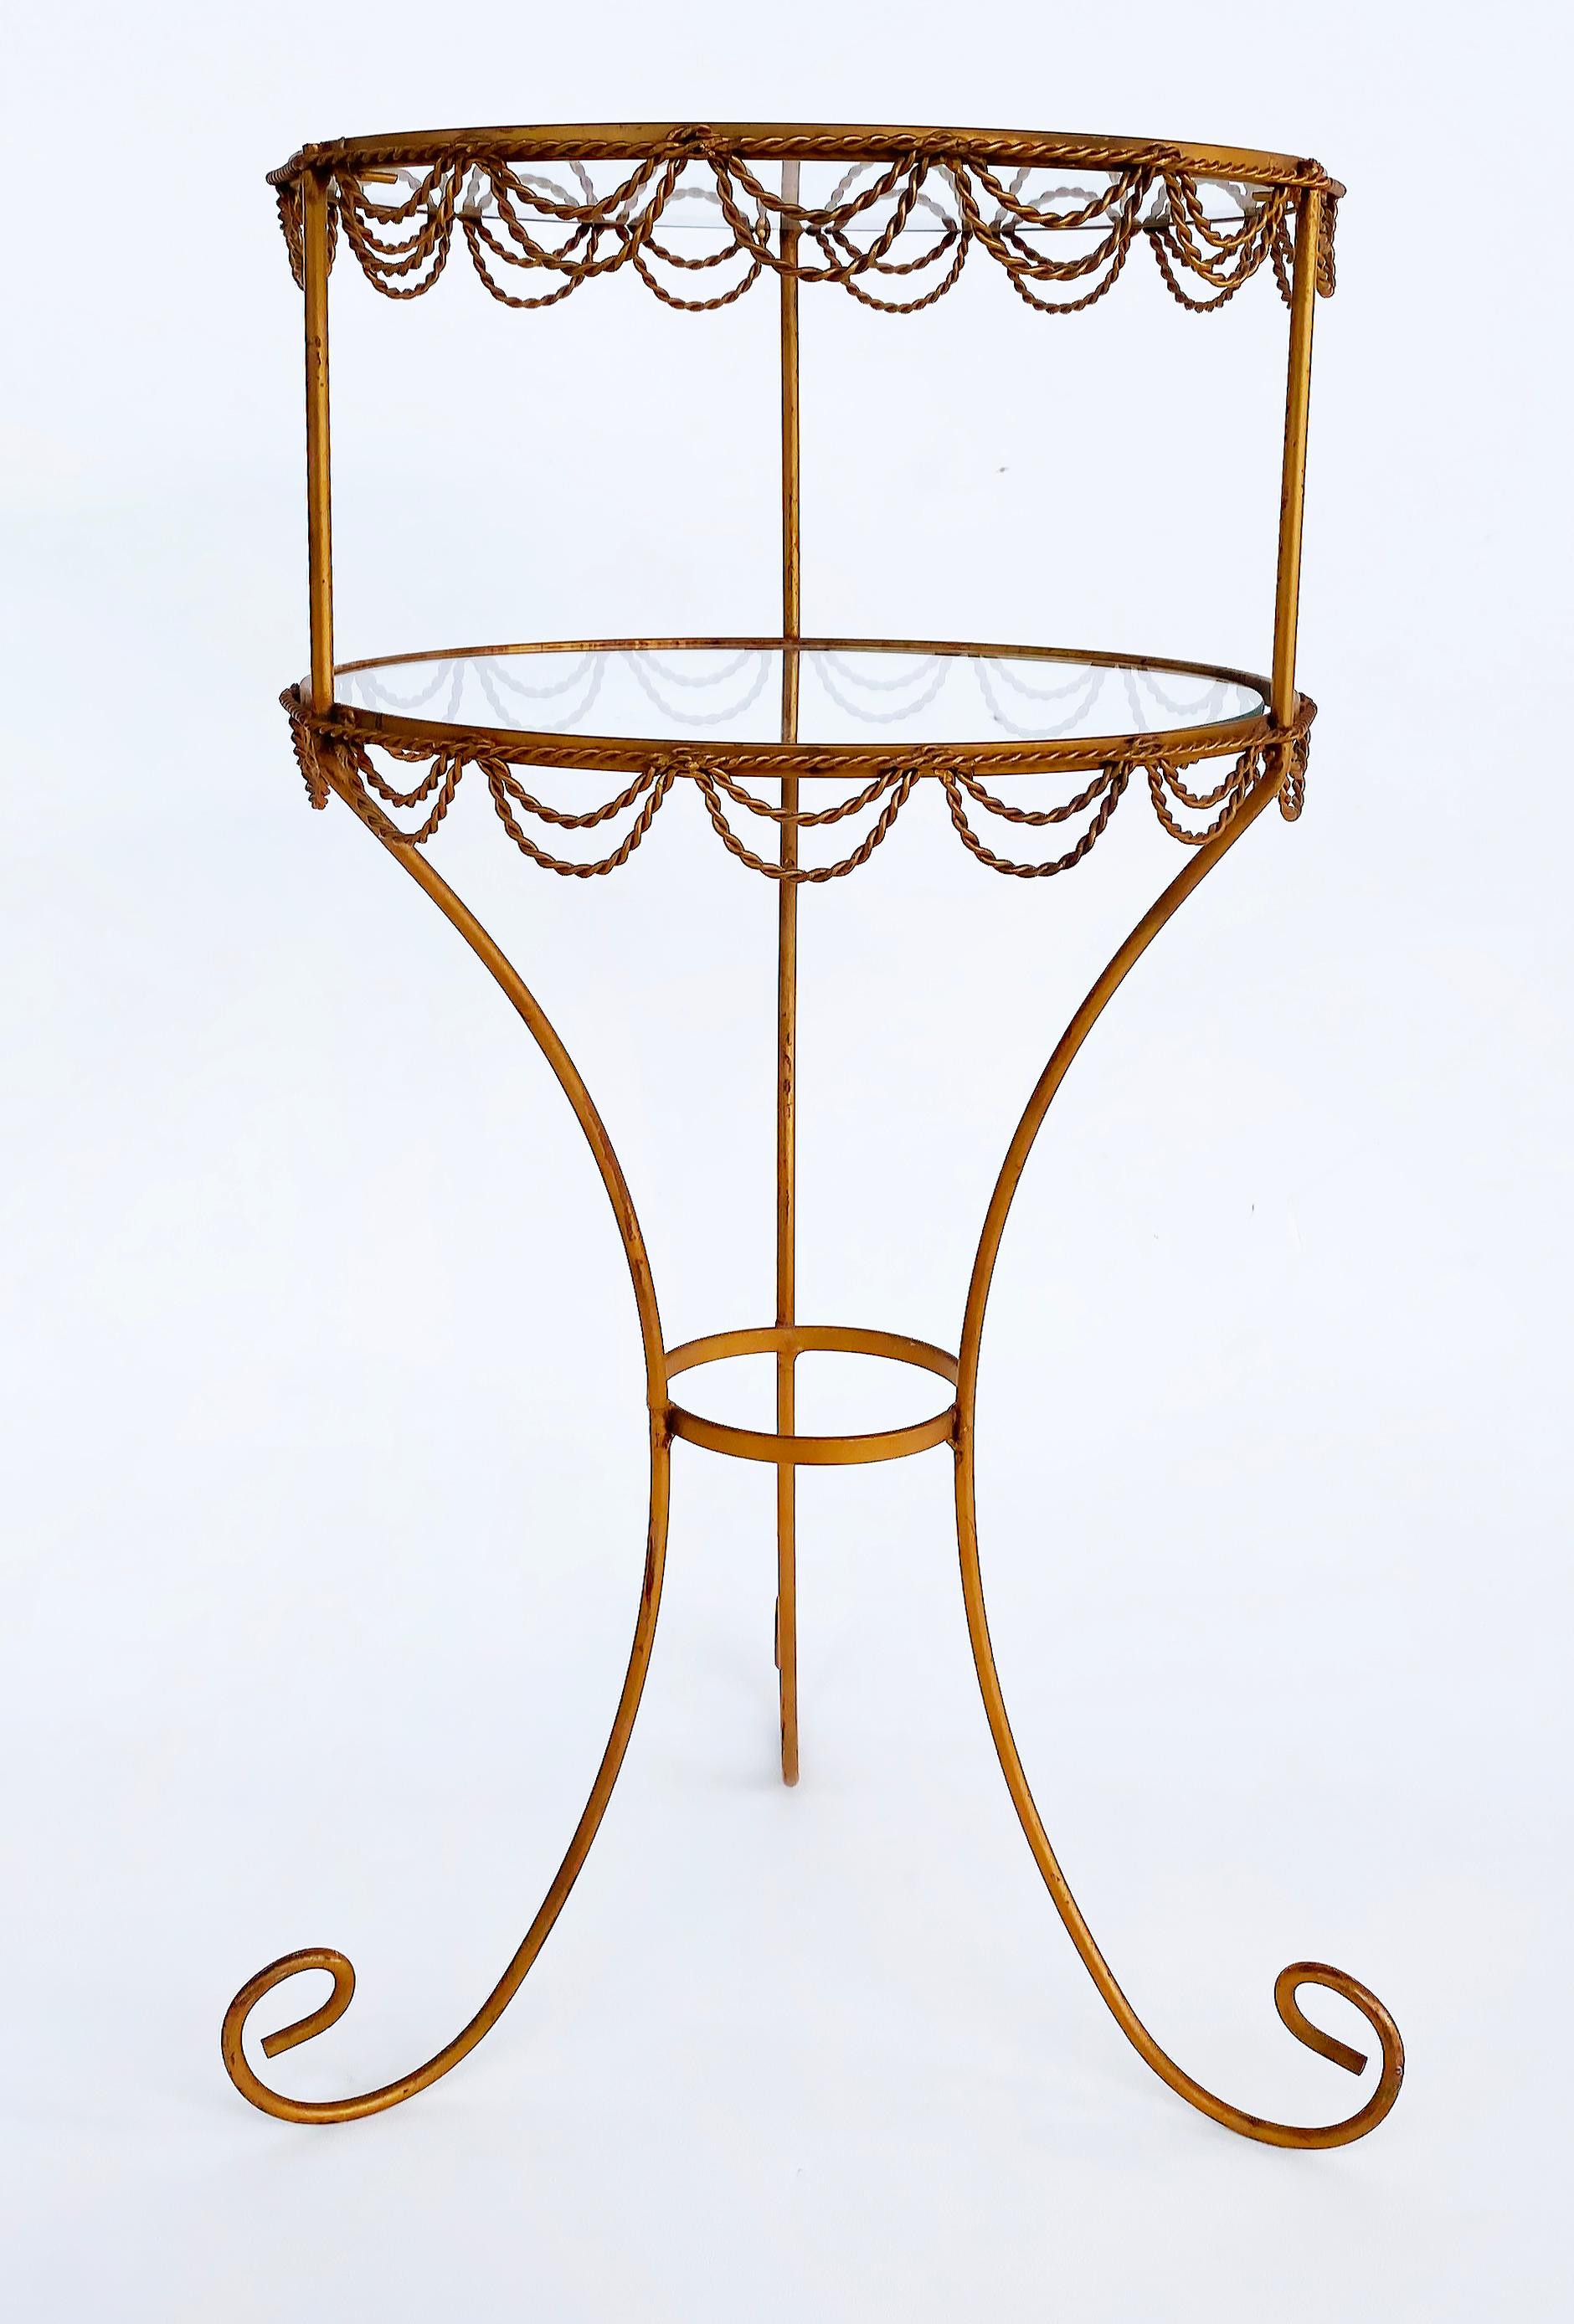 Vintage French 2-tiered Gilt Iron Side Table Stand with Inset Glass 

Offered for sale is a delicately designed French gilt-iron two-tier side table or stand.  The round table with curved legs is trimmed in twisted gilt-wire swag details. The top